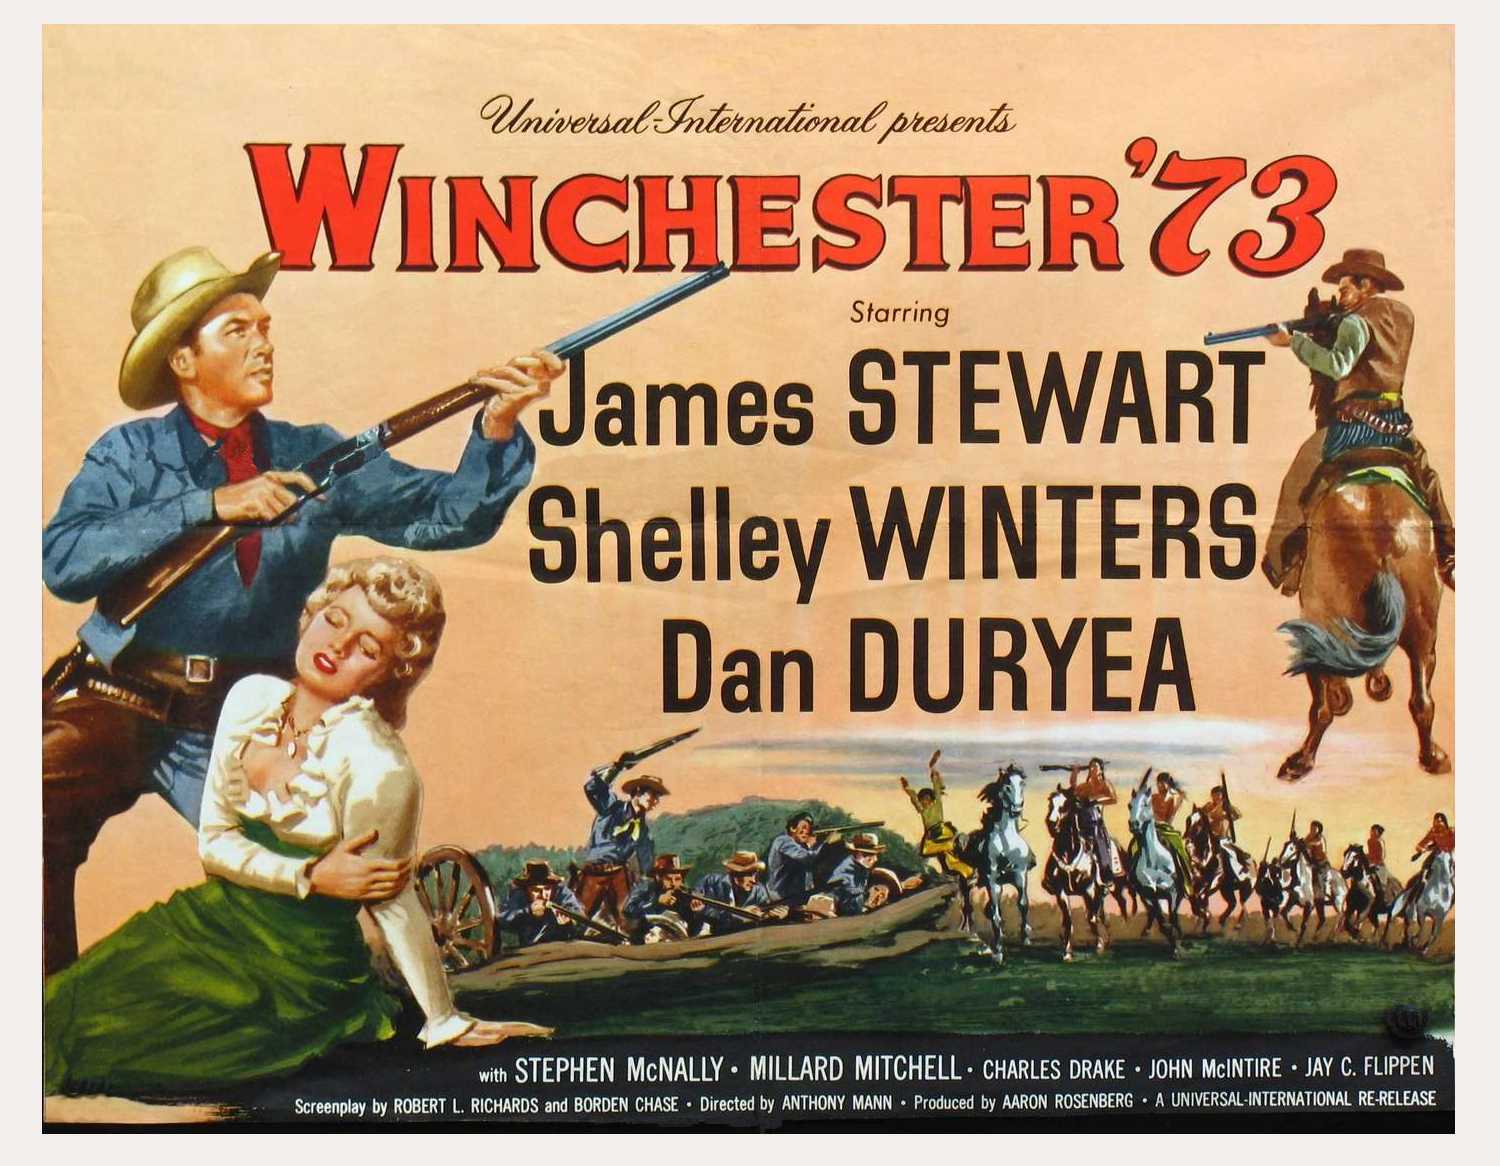 Poster for the 1950 Anthony Mann film Winchester '73, starring James Stewart and Shelley Winters